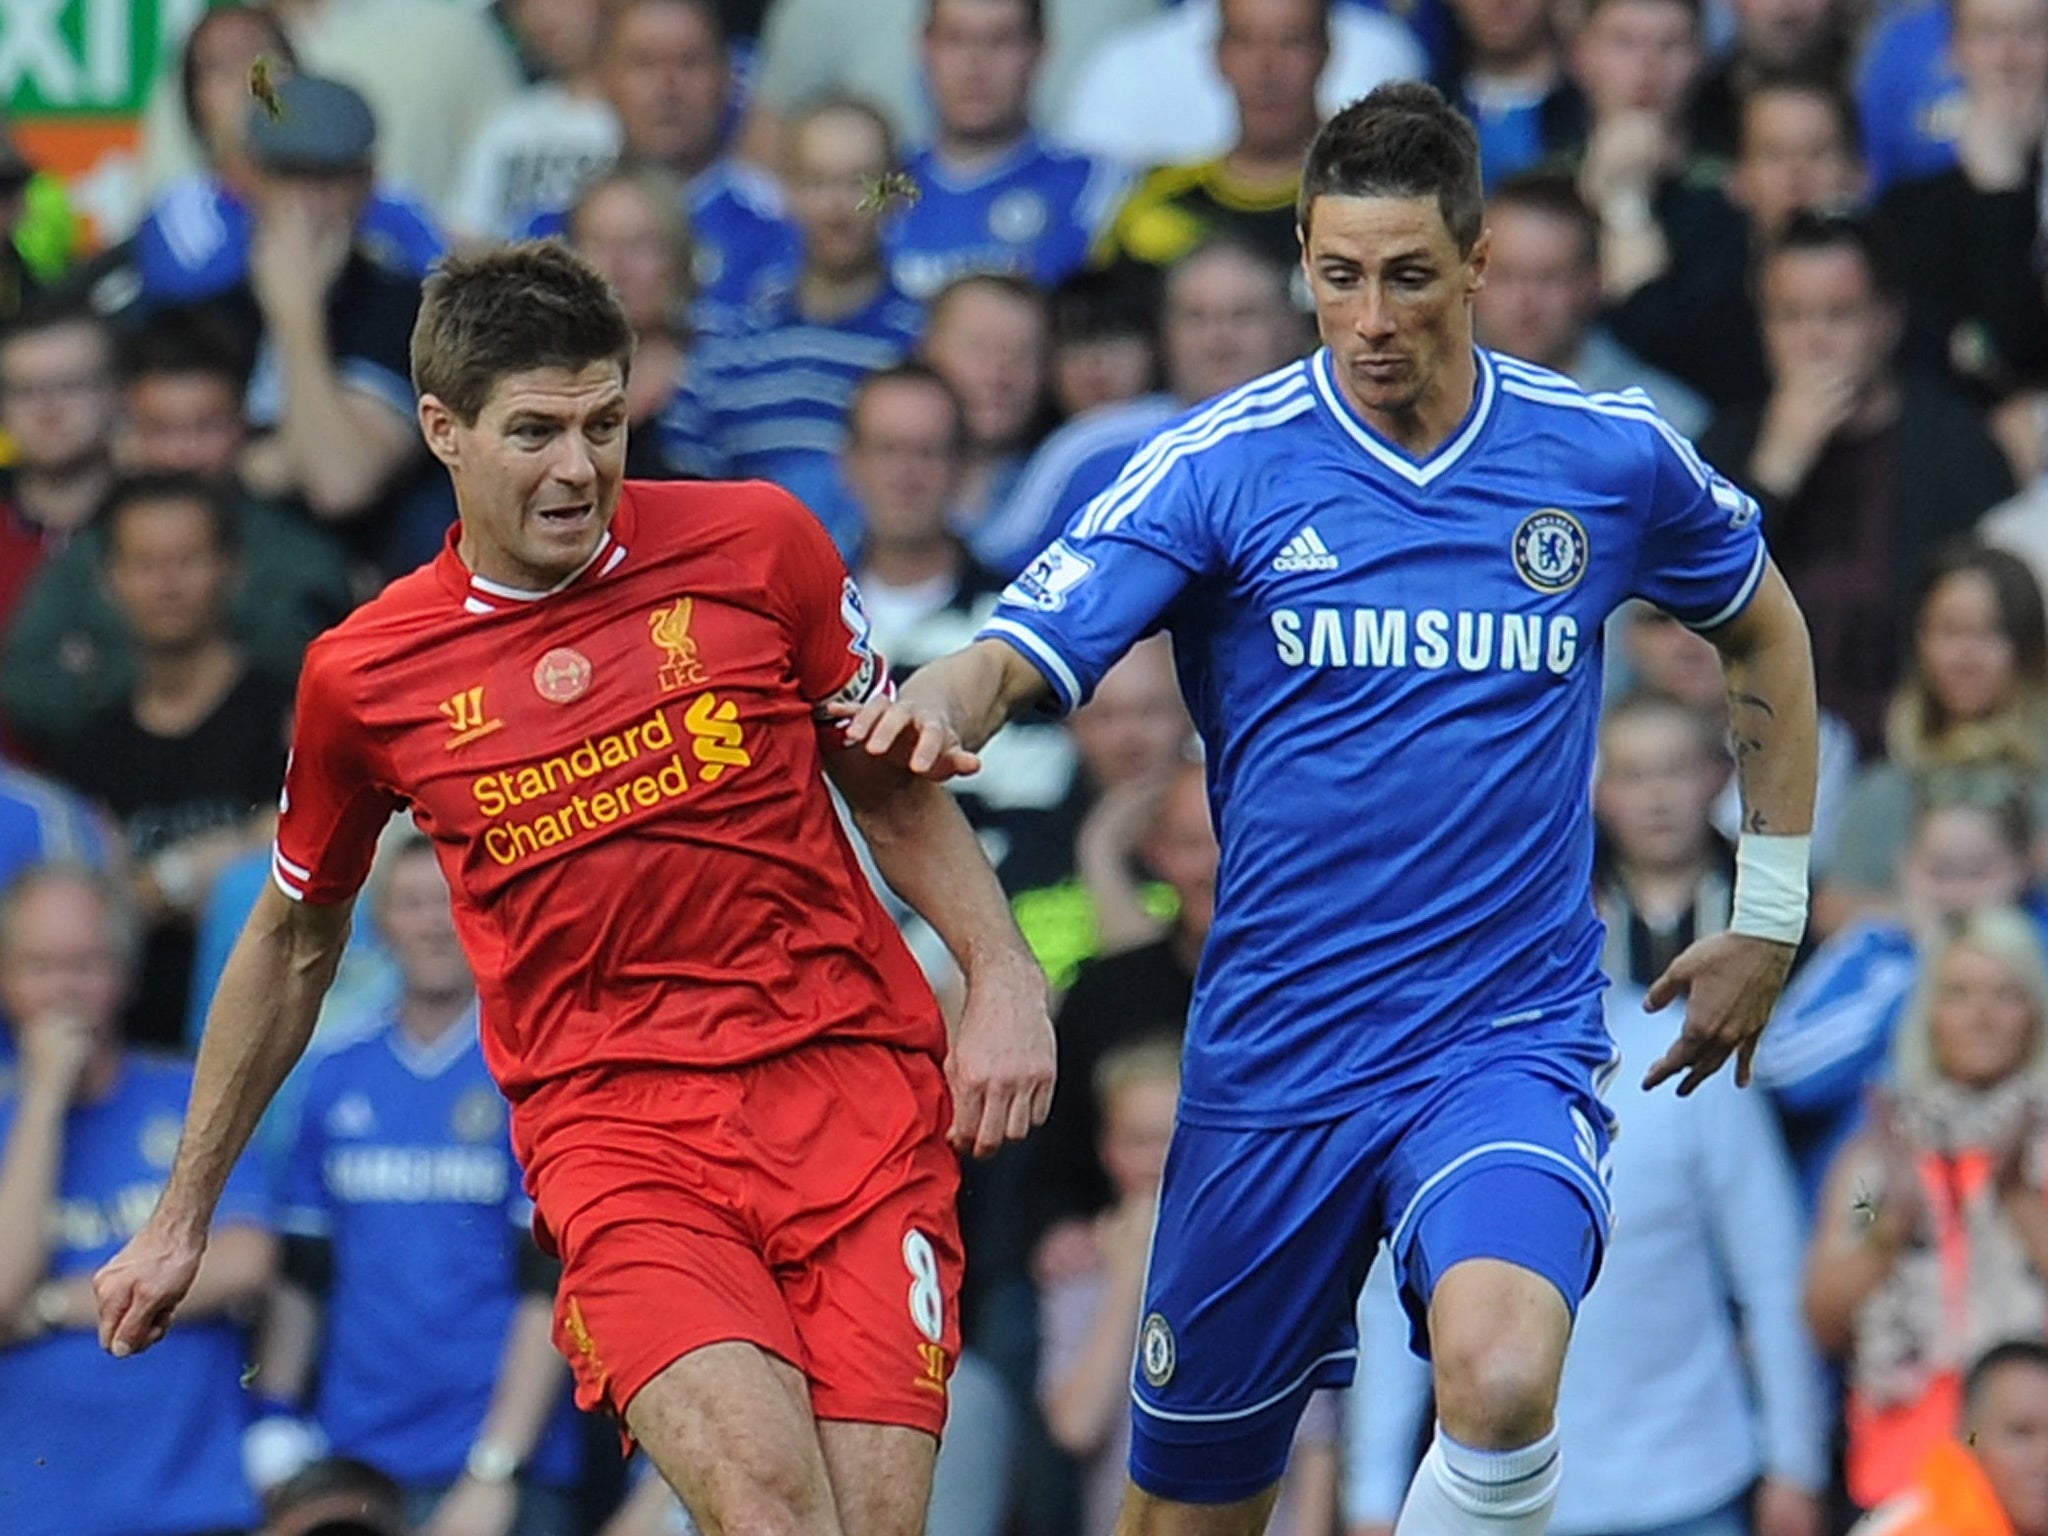 Steven Gerrard and Fernando Torres forged a friendship during their time together at Liverpool